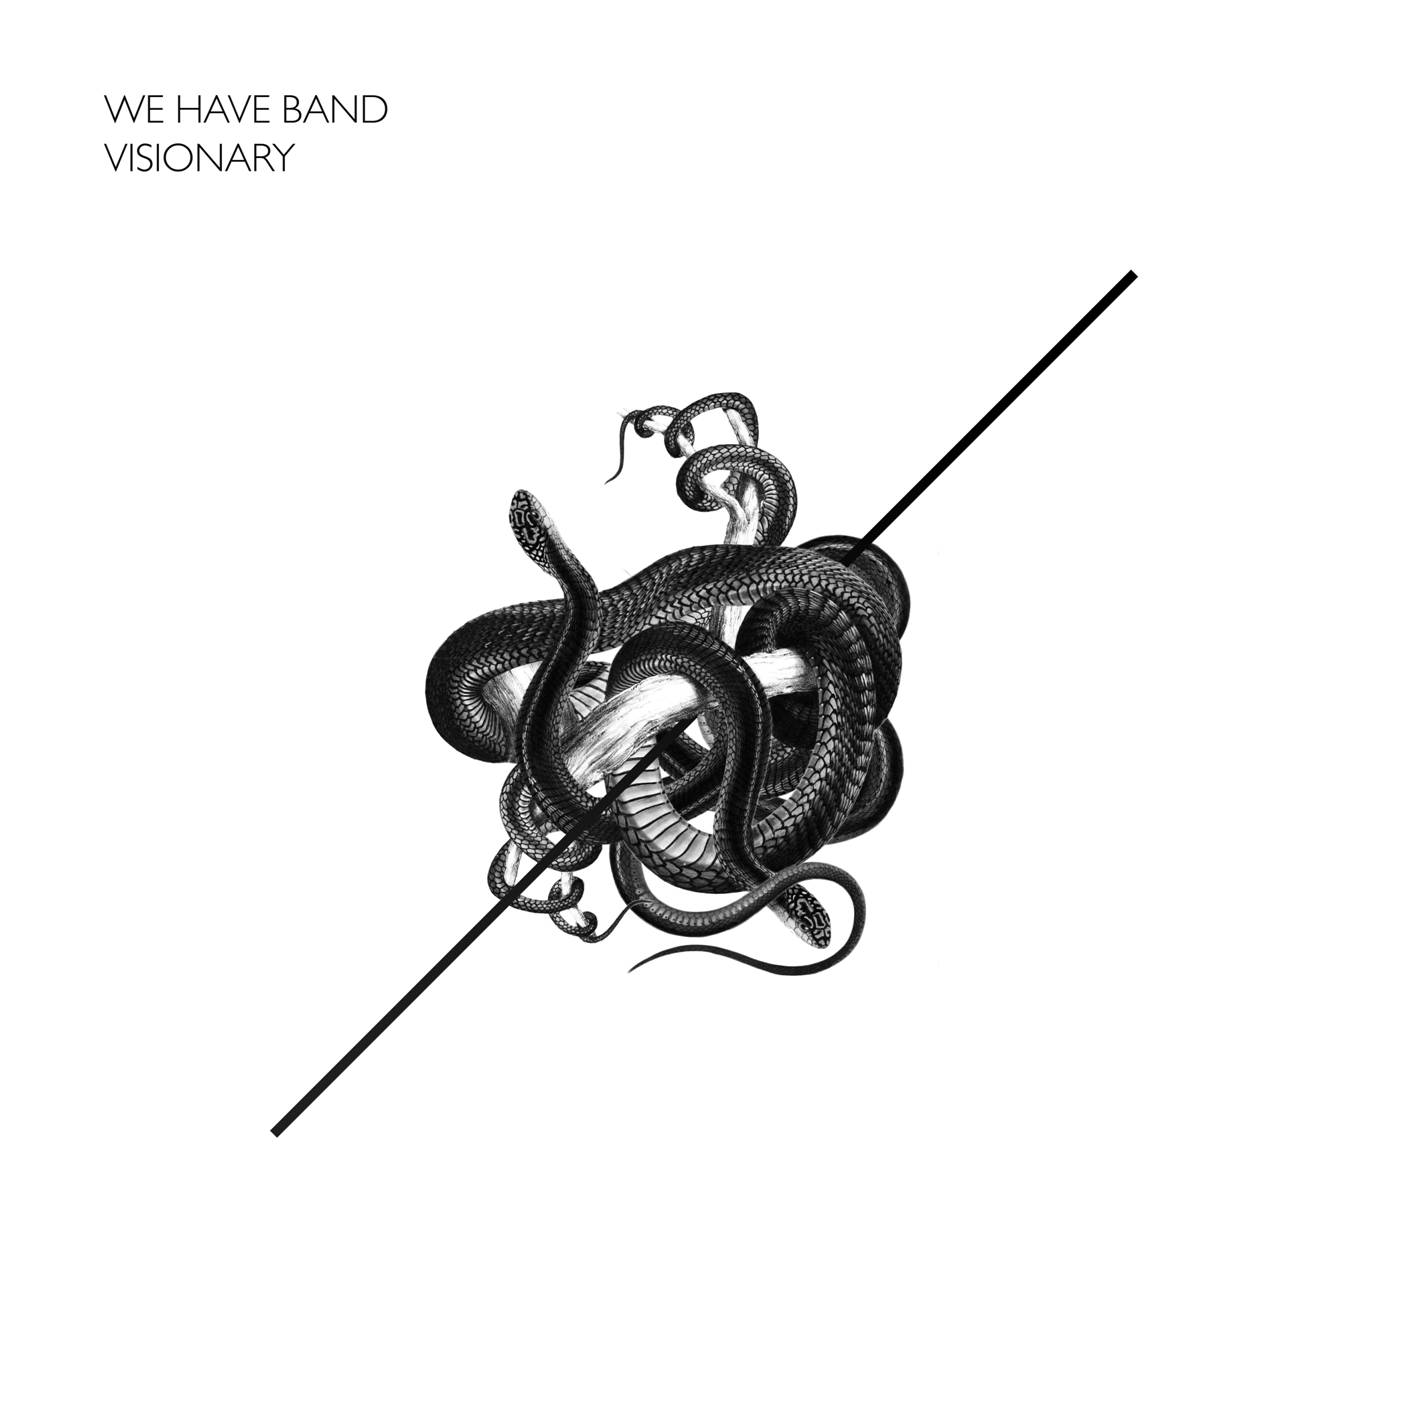 WE HAVE BAND – Neues Album? Neuer Song!